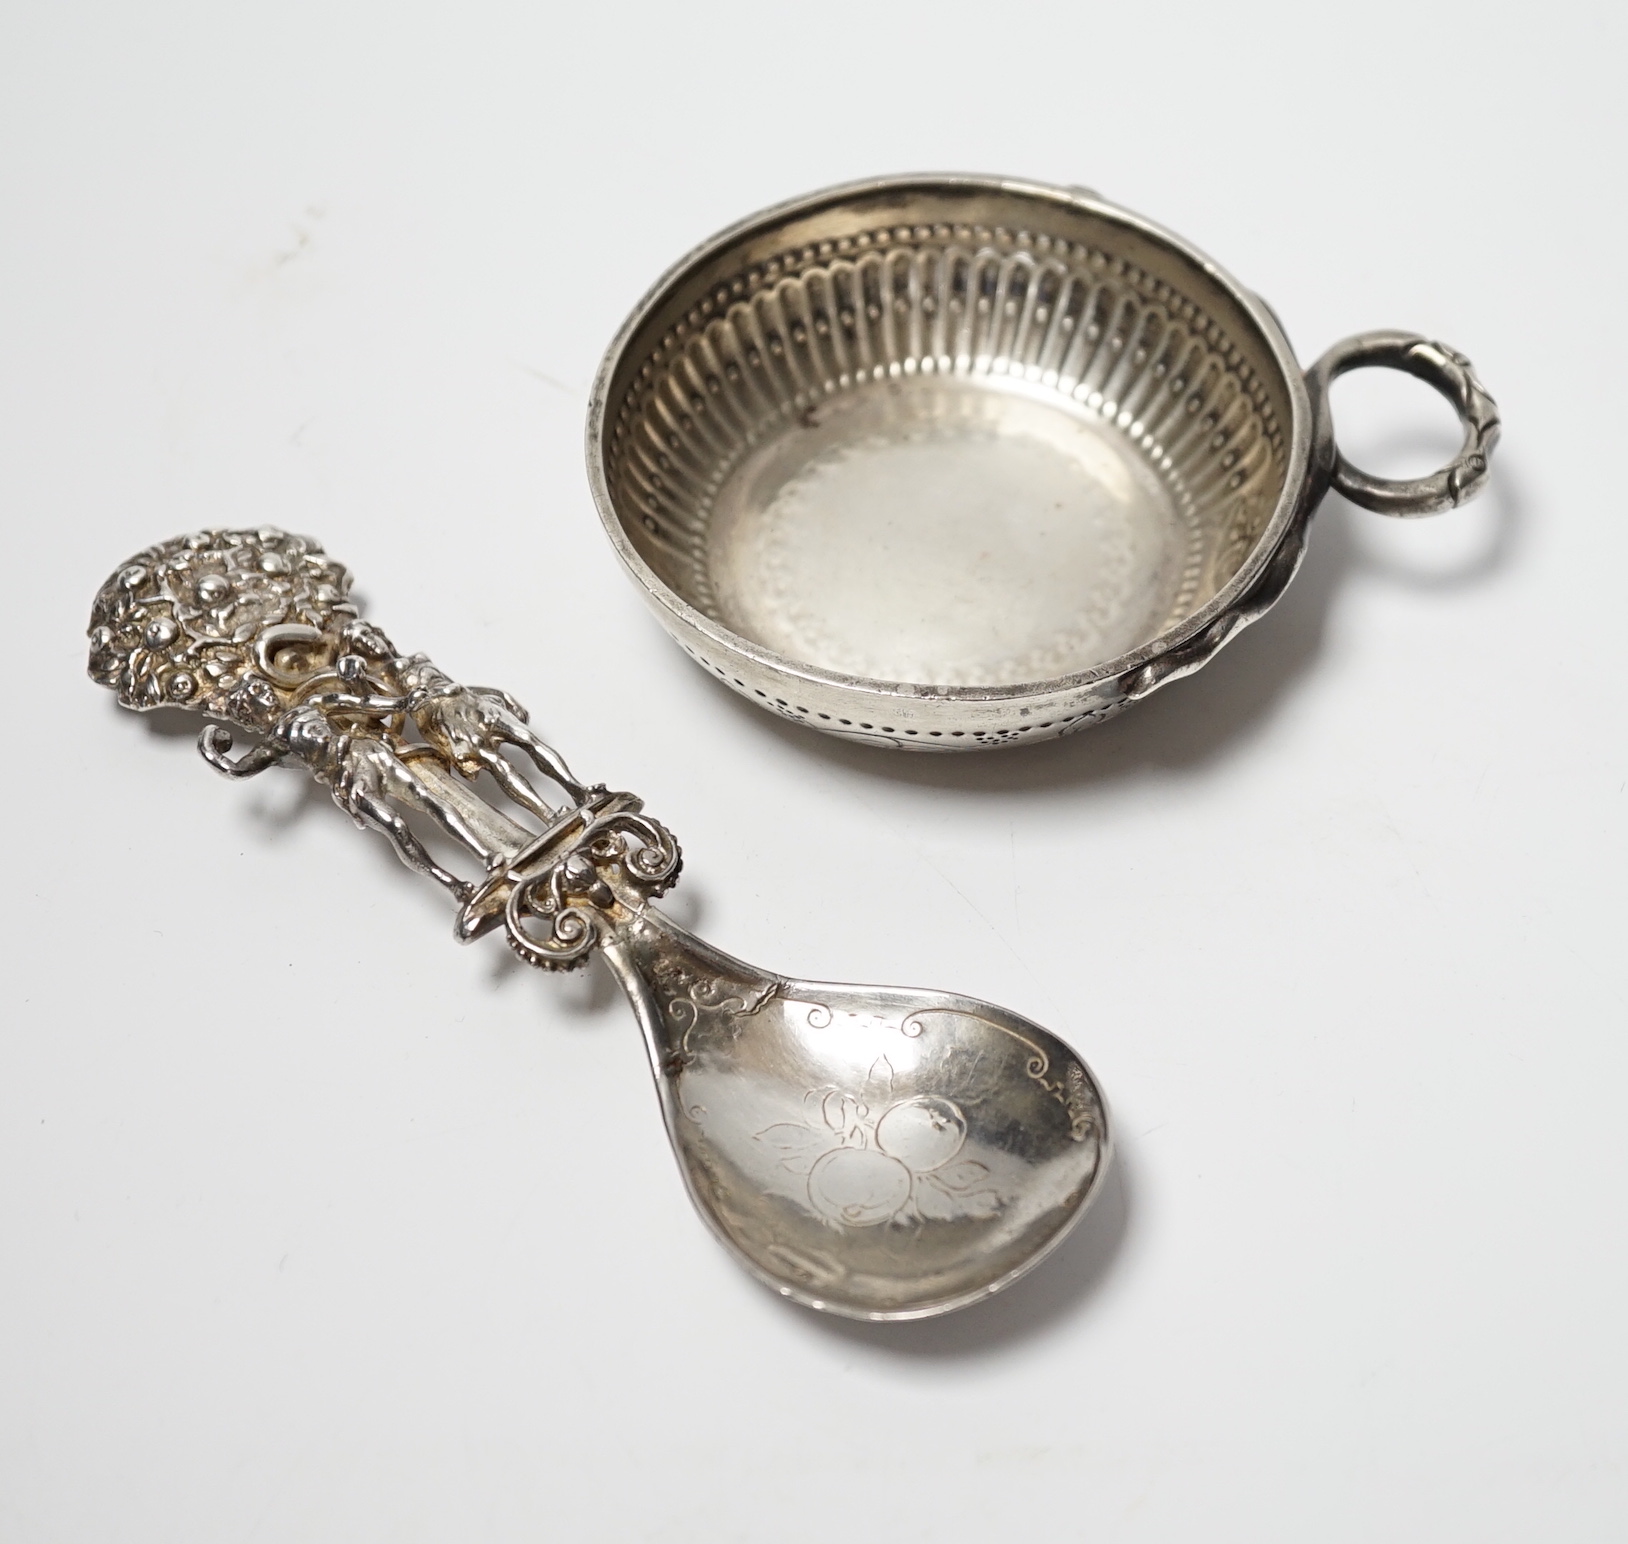 A George V silver taste vin, C.J. Vander Ltd, London, 1932, diameter 81mm, together with a Hanau ornate silver spoon, depicting Adam and Eve with the serpent, import marks for Berthold Muller, London, 1903, 14cm.        